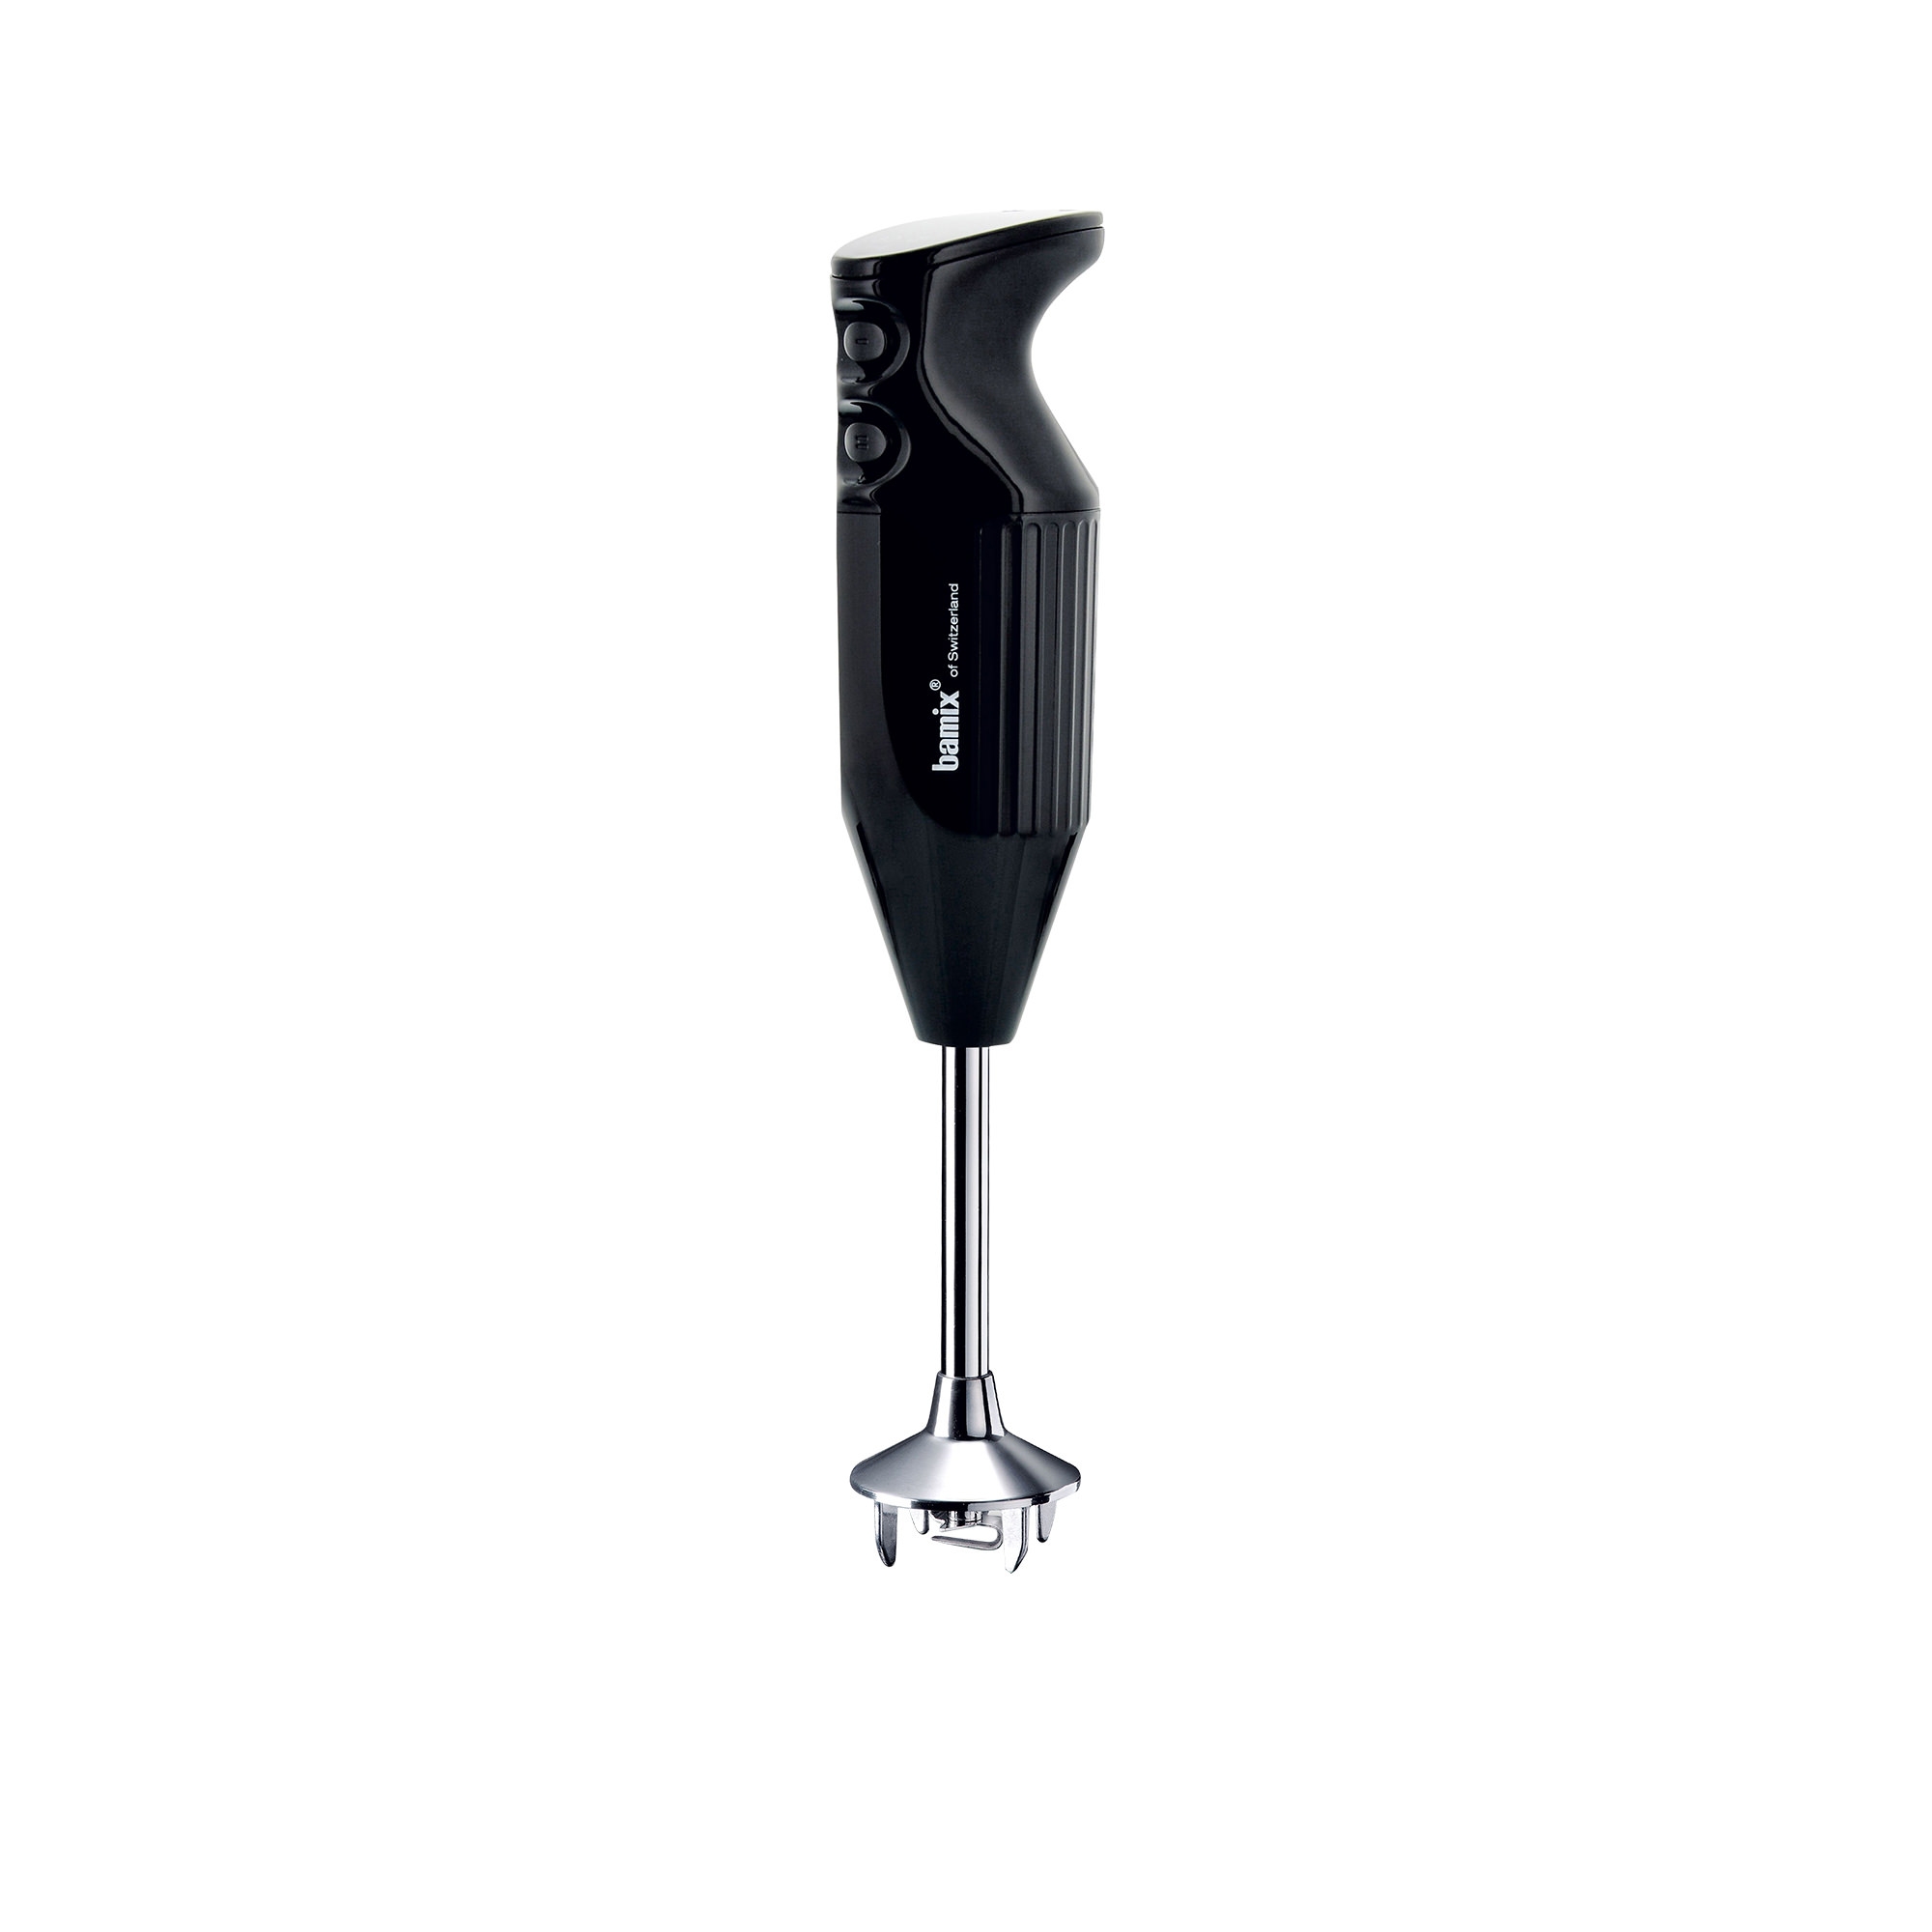 Bamix Speciality Grill & Chill BBQ Immersion Blender 200W Black Image 2